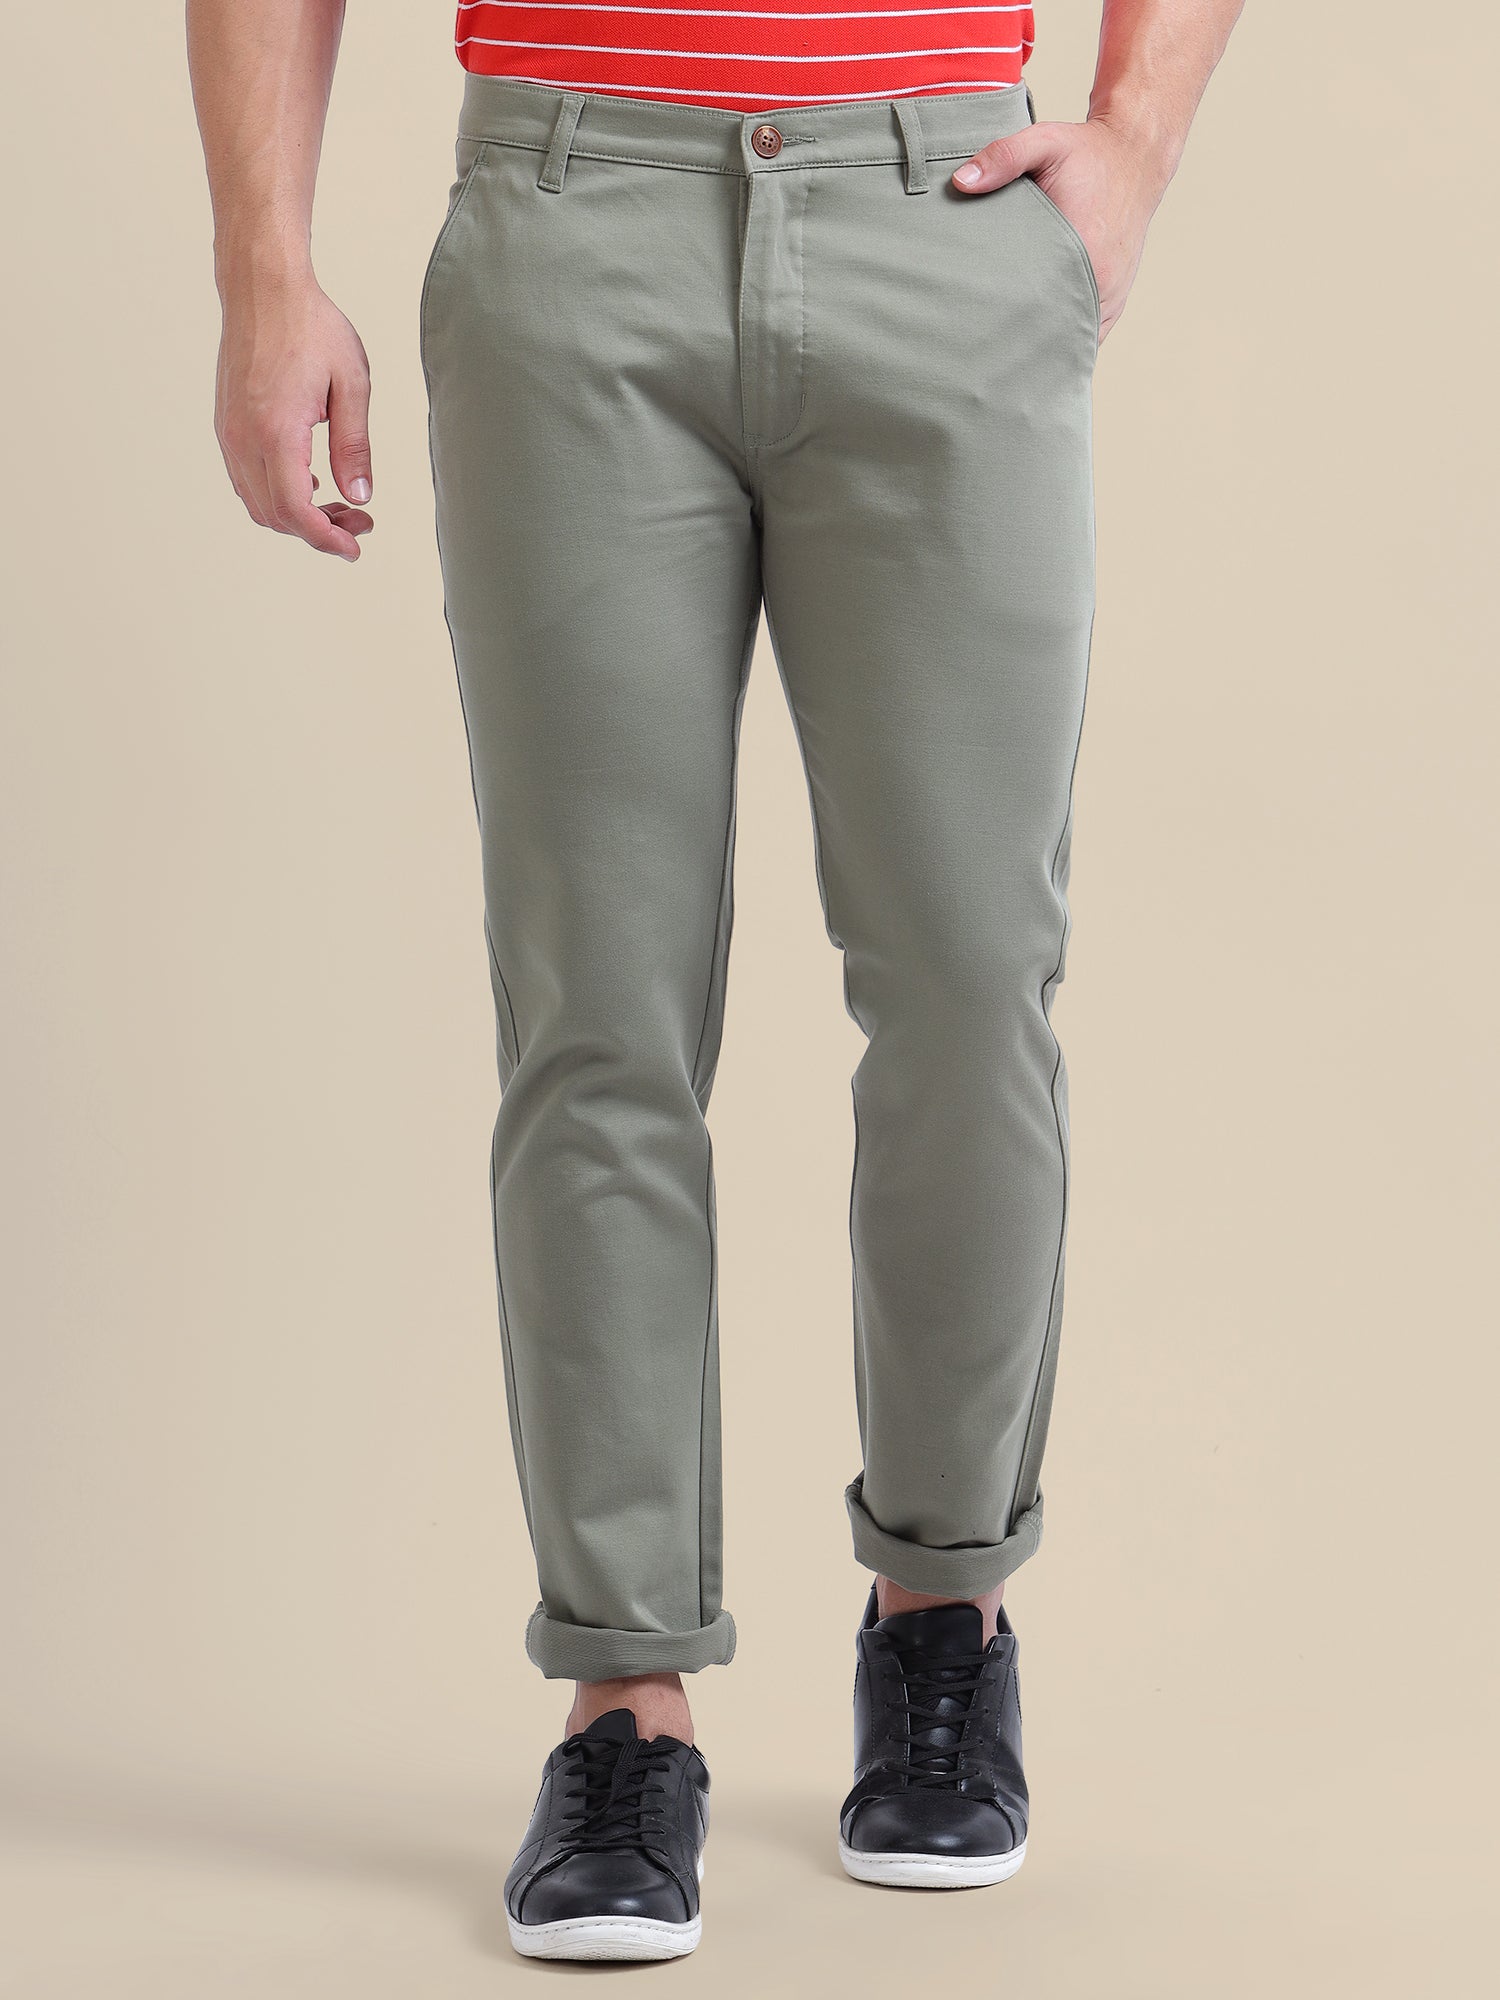 Men's Trousers Men's Chinos  